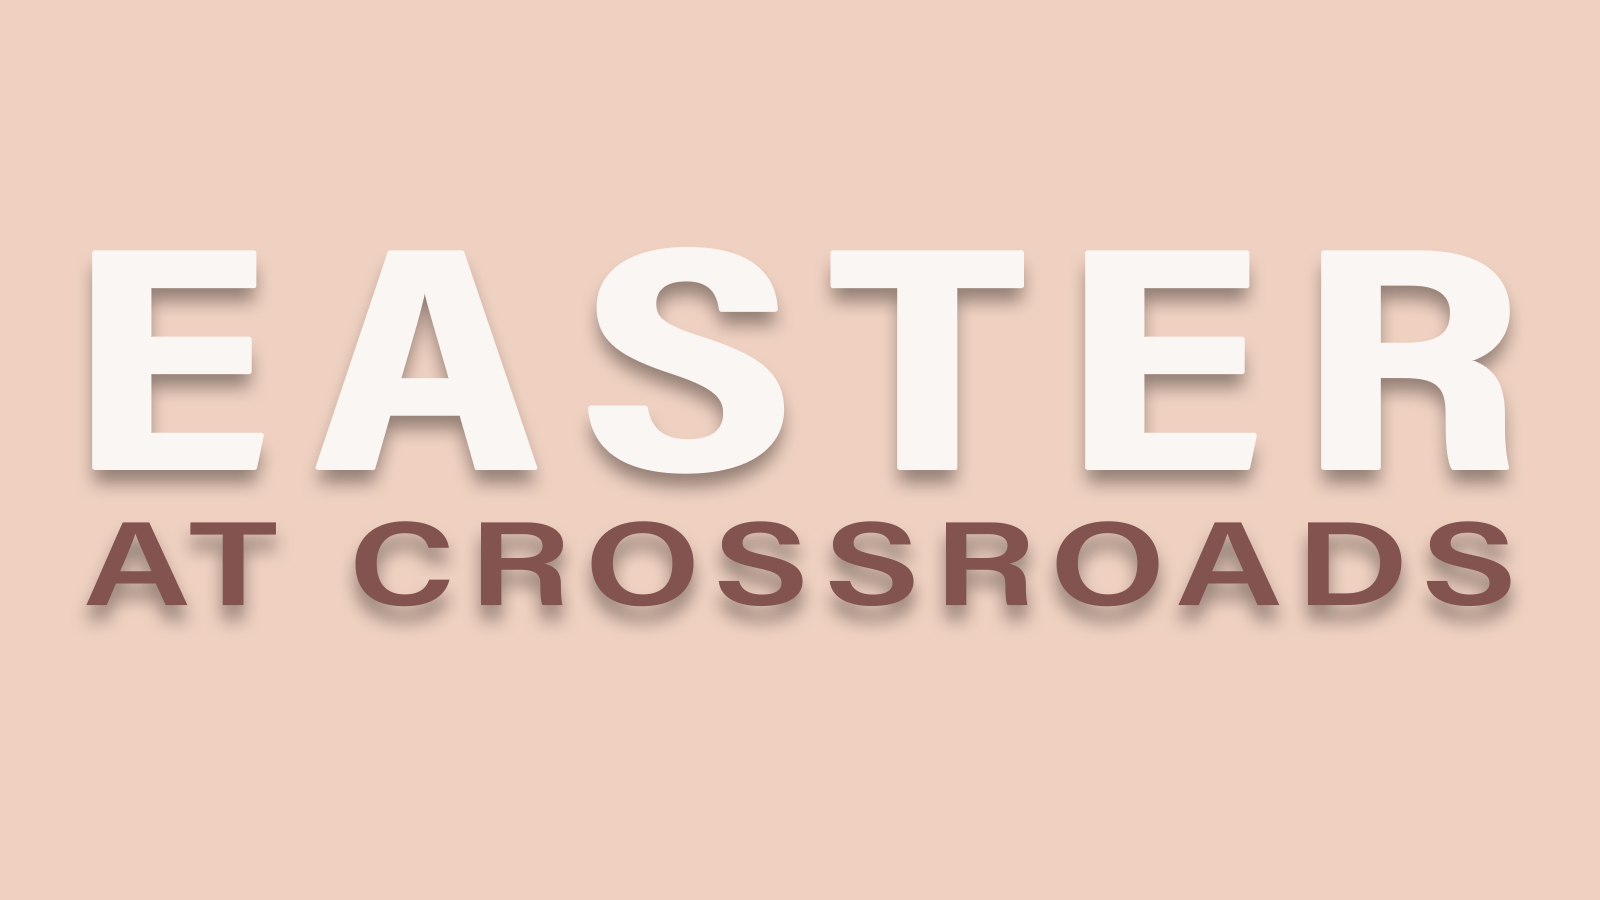 Easter at Crossroads